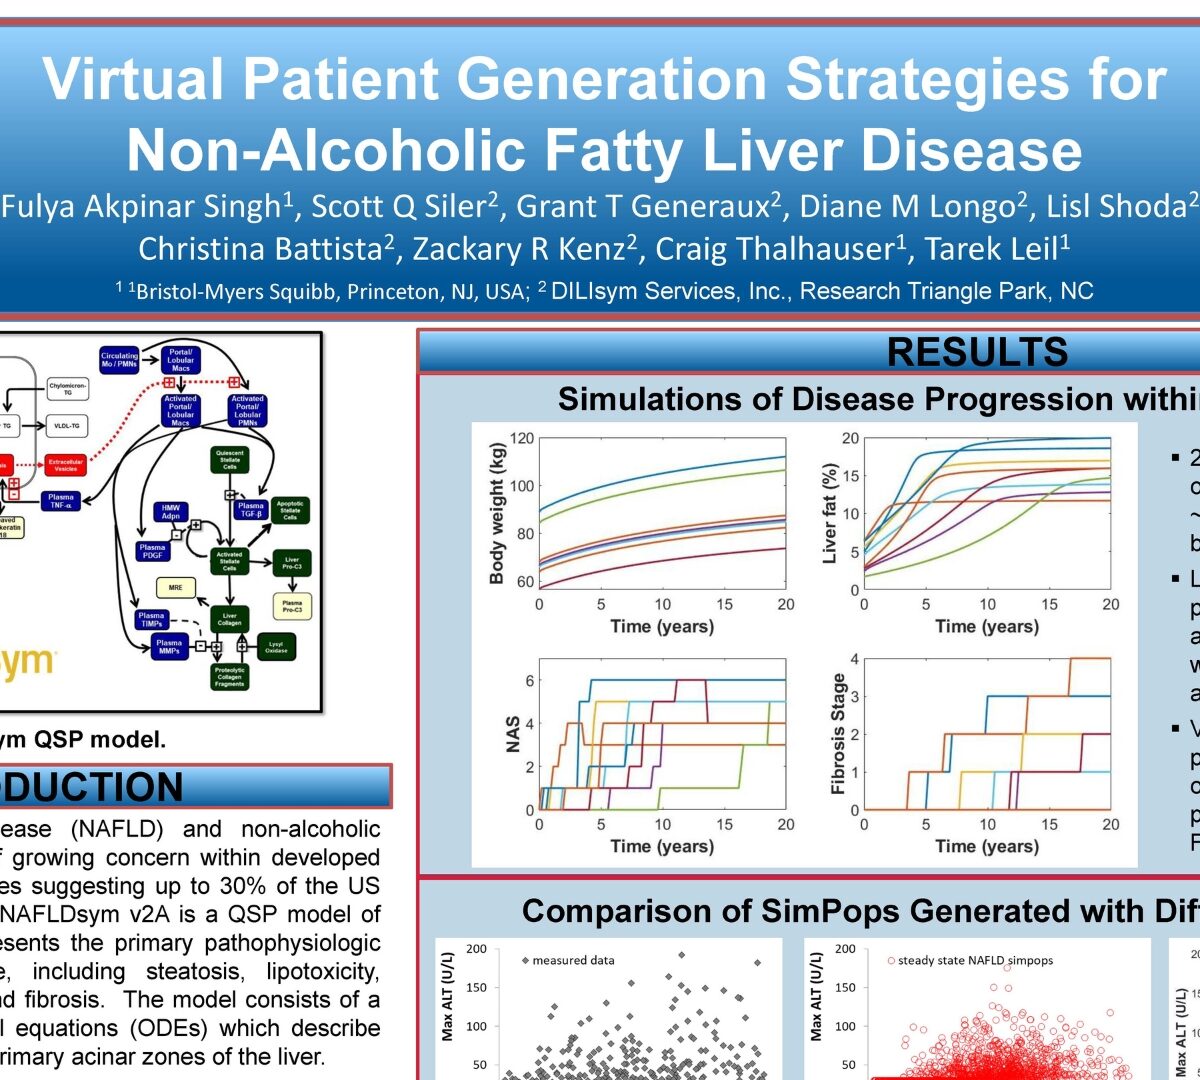 Virtual Patient Generation Strategies for Non-Alcoholic Fatty Liver Disease